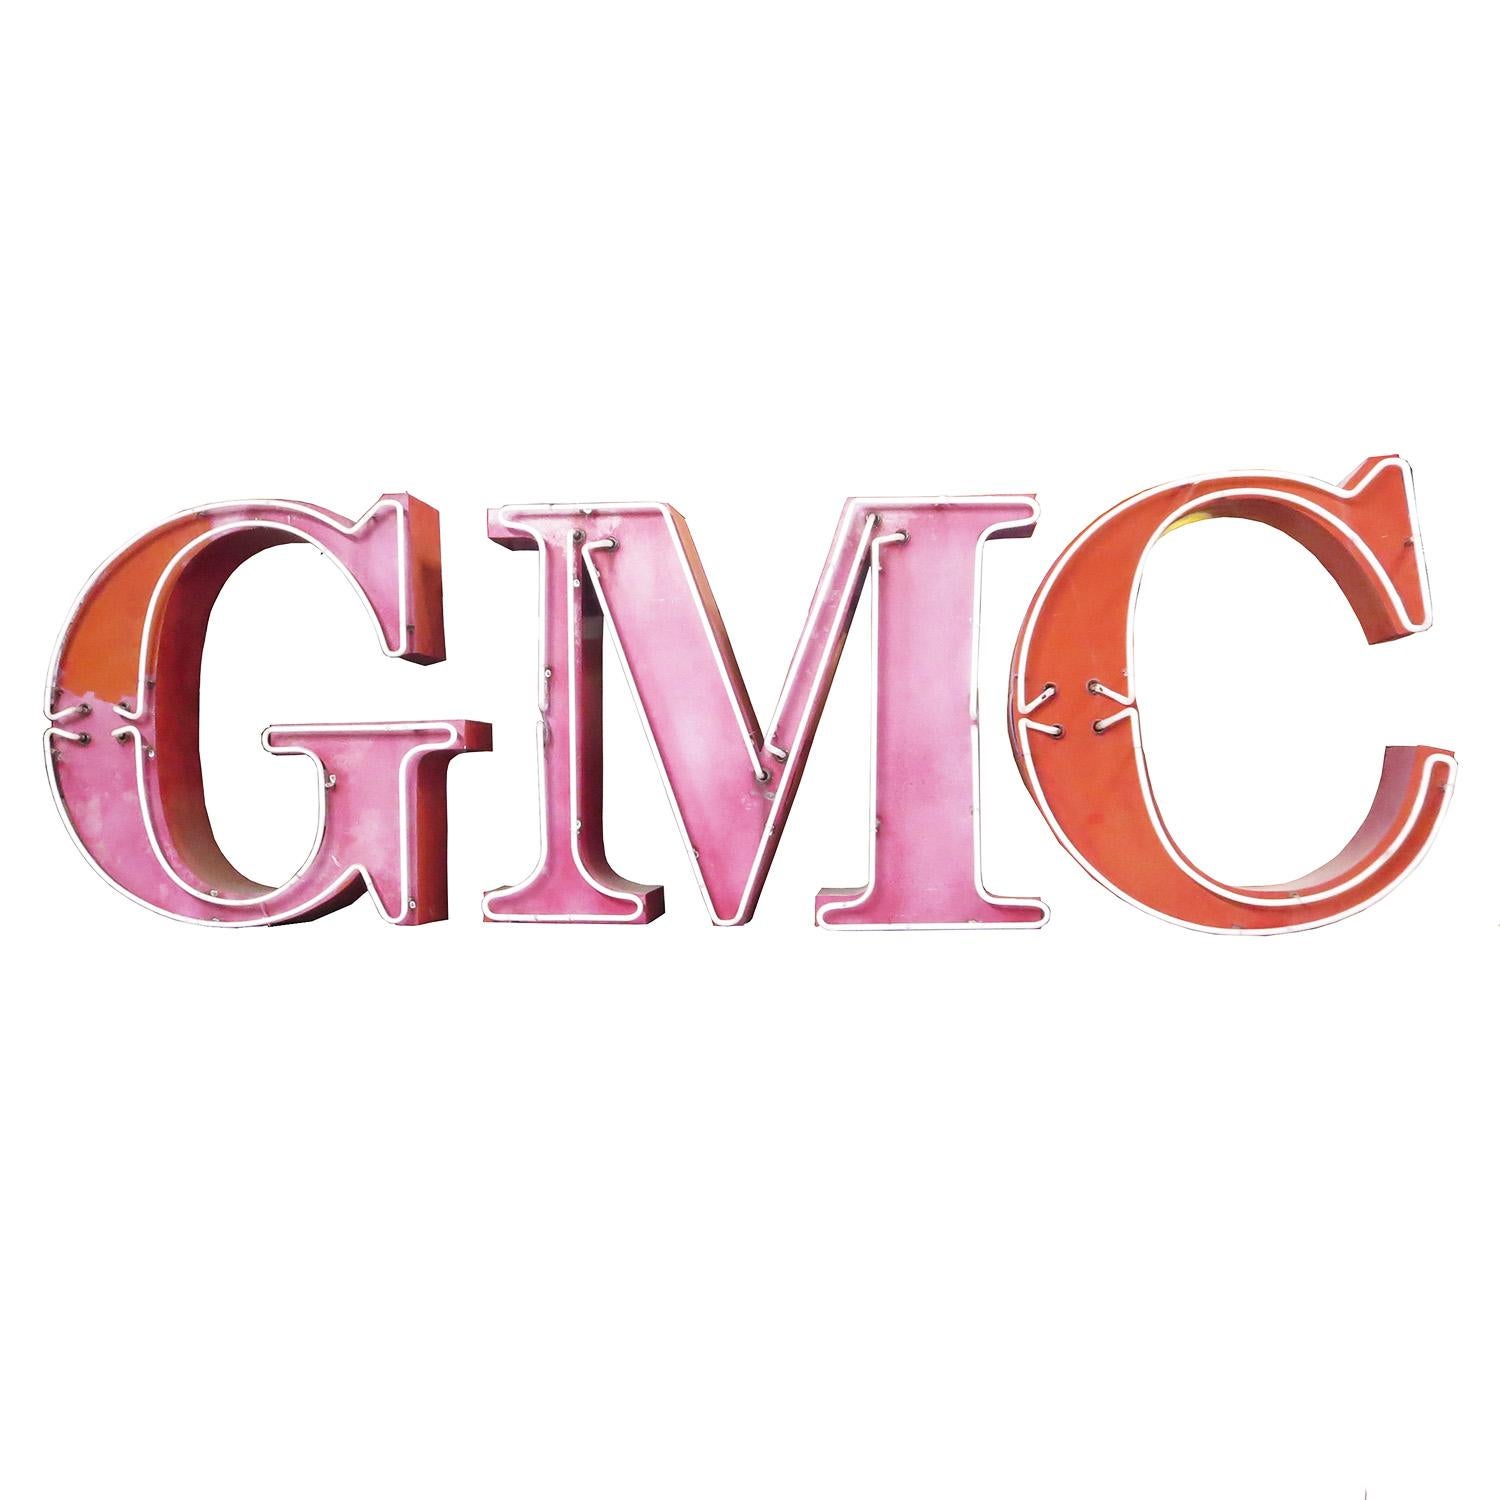 This wonderful sign came from the Oakland California dealership, which sold GMC, Cadillac, Pontiac, and Buick automobiles. We are fortunate to have acquired both the GMC and Buick signs. Each neon letter is individually powered, with a separate